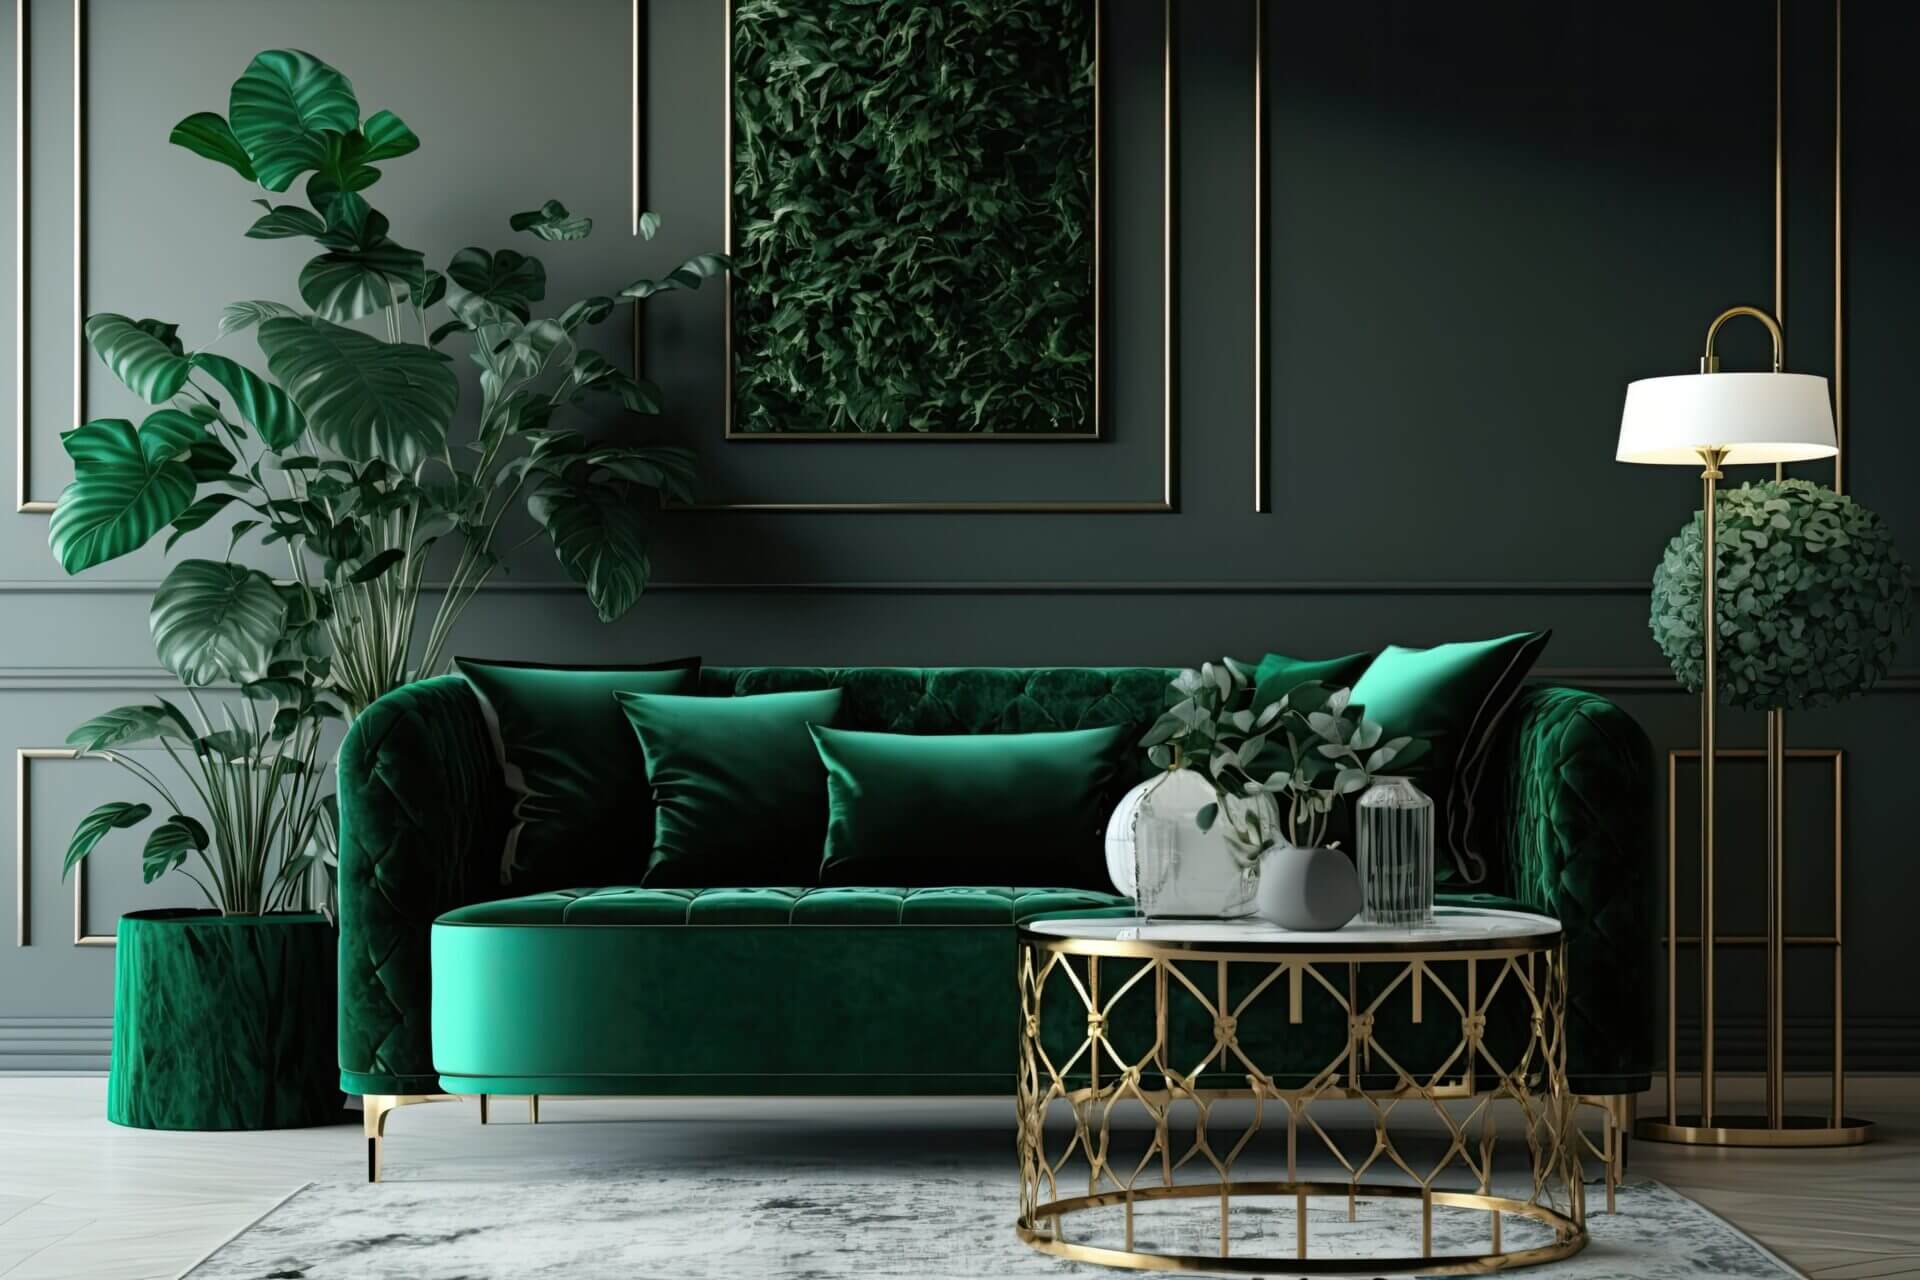 With A Green Velvet Sofa, A Custom Coffee Table, A Marble Table Lamp, A Hanging Gold Flowerbed, And Fine Accessories, This Living Room Has A Stylish And Opulent Interior Design. Template. Modern Interior Design